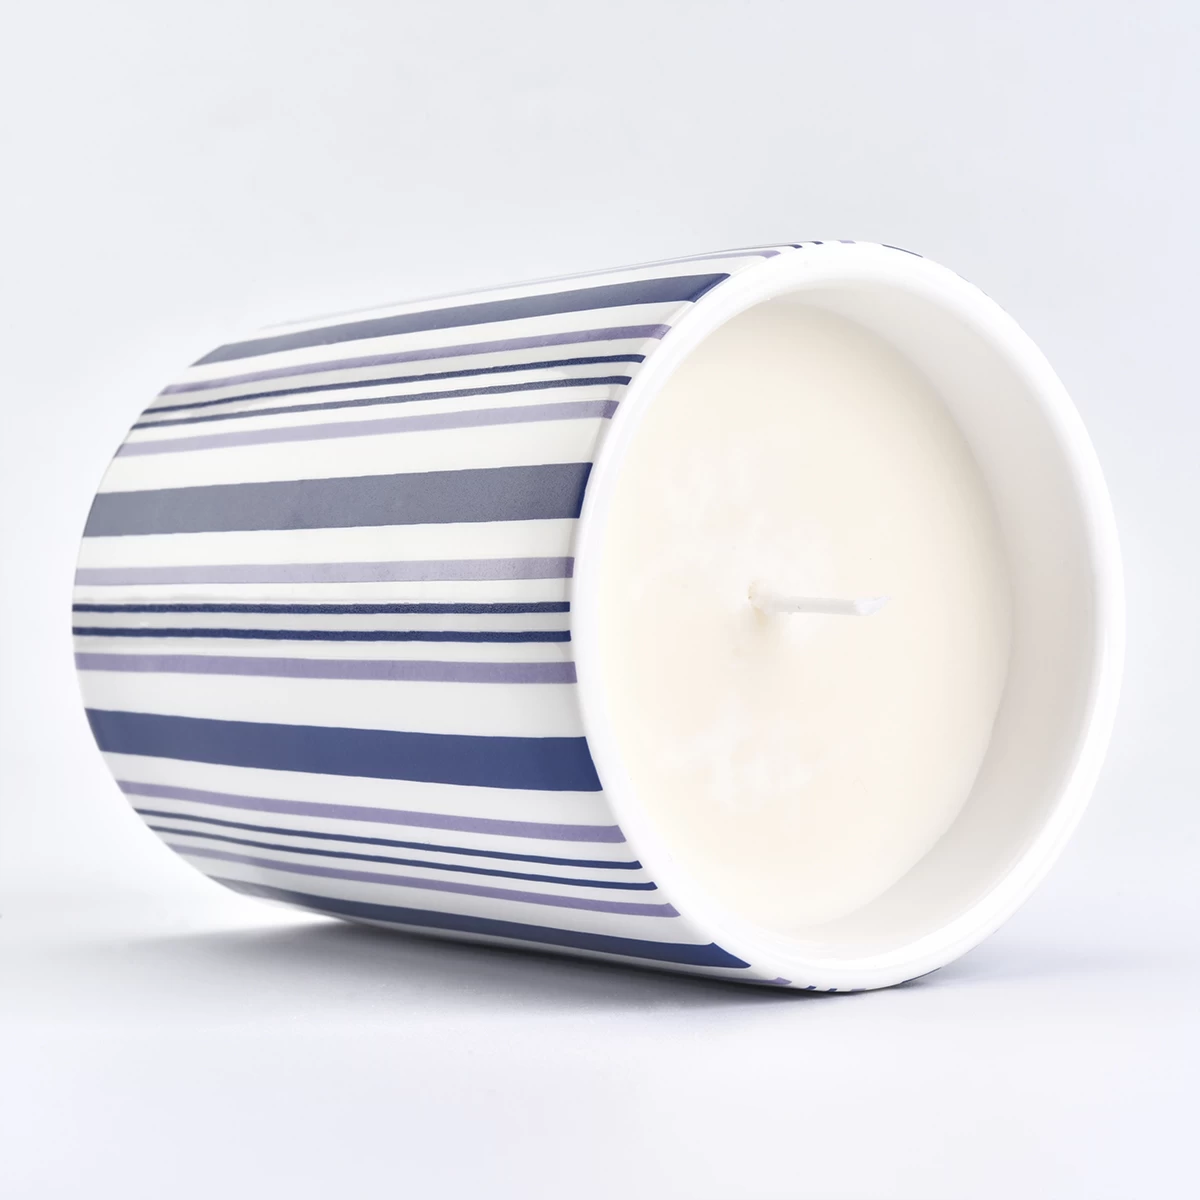 wholesale candle jars with stripes decal, empty ceramic candle holder